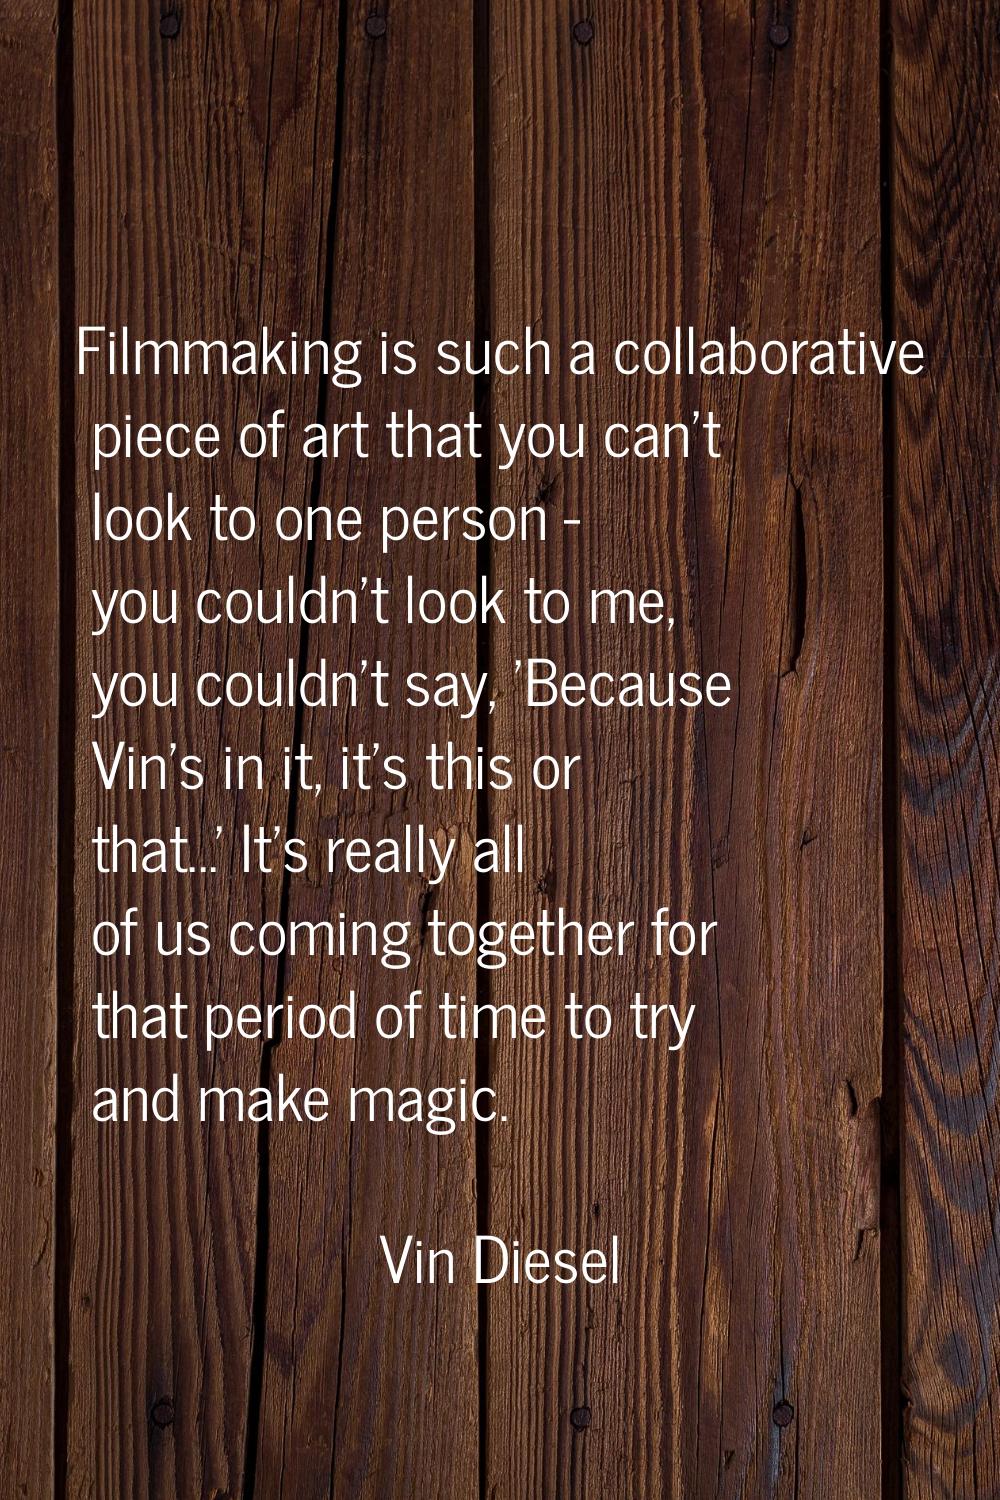 Filmmaking is such a collaborative piece of art that you can't look to one person - you couldn't lo